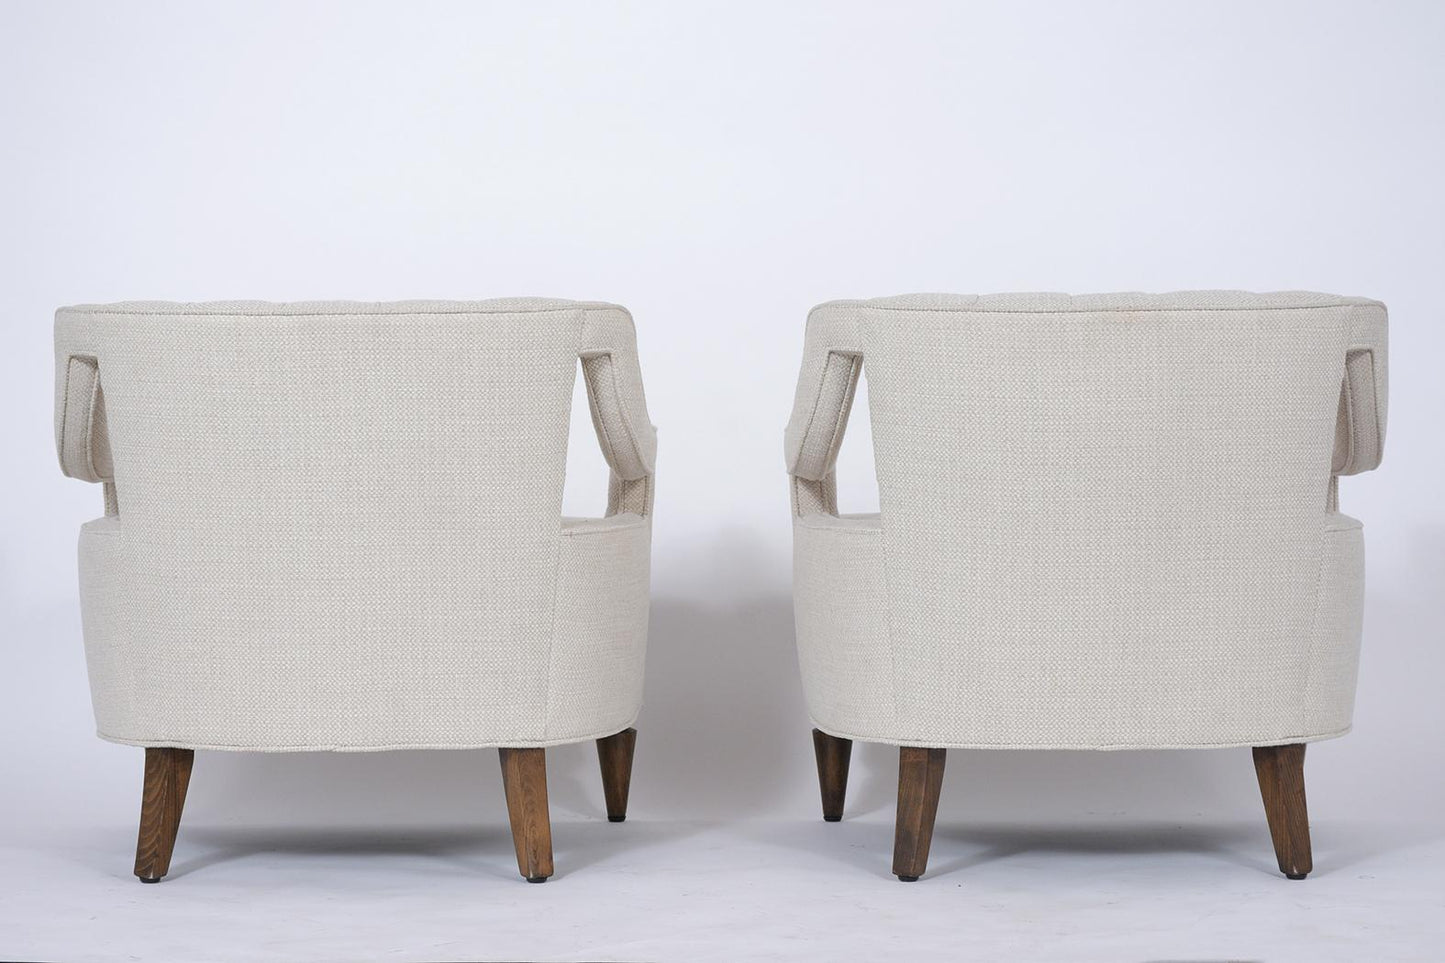 Pair of Mid-Century Modern Upholstery Lounge Chairs